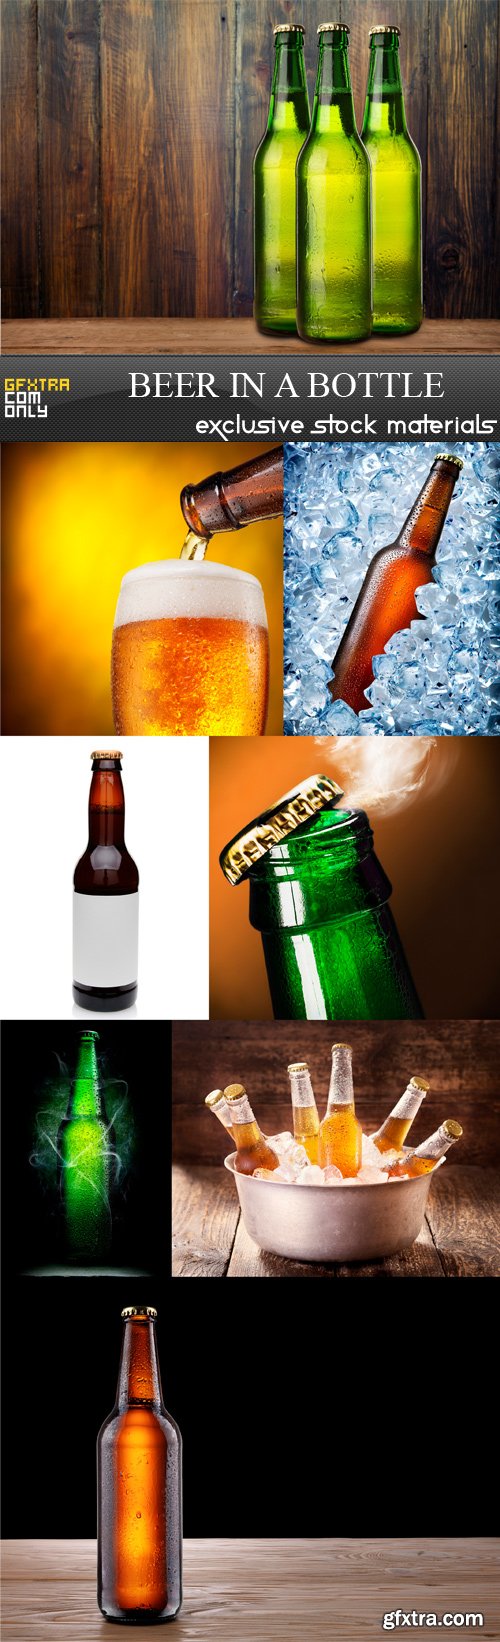 Beer in a bottle - 8 UHQ JPEG